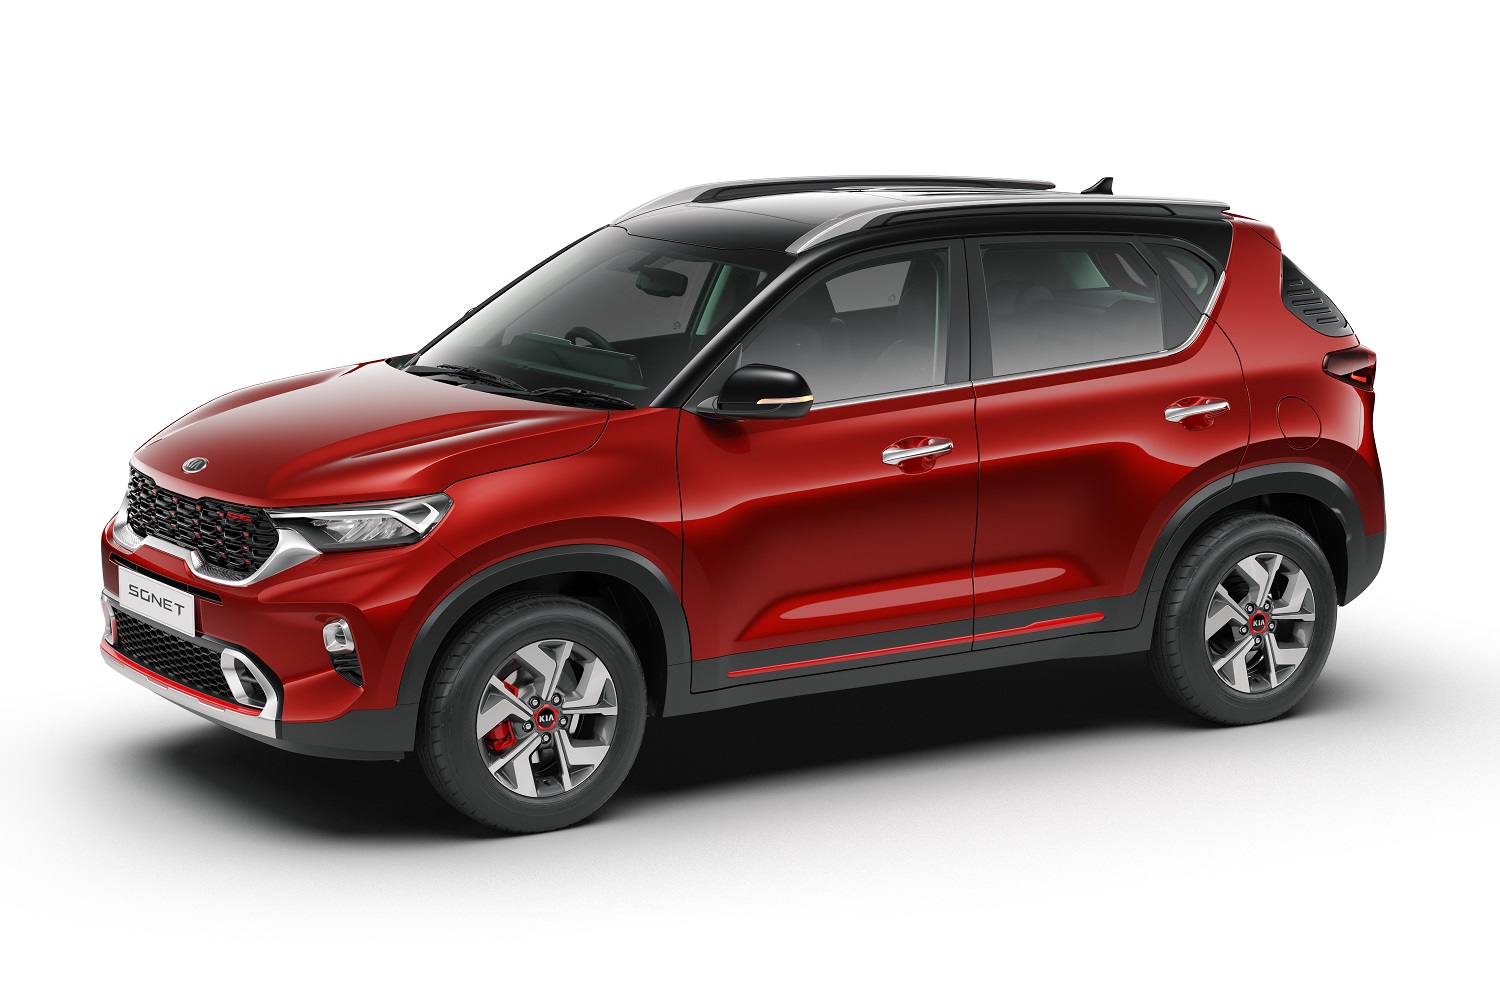 Kia 2020 SUV Launched in India With Starting Price of Rs 6.71